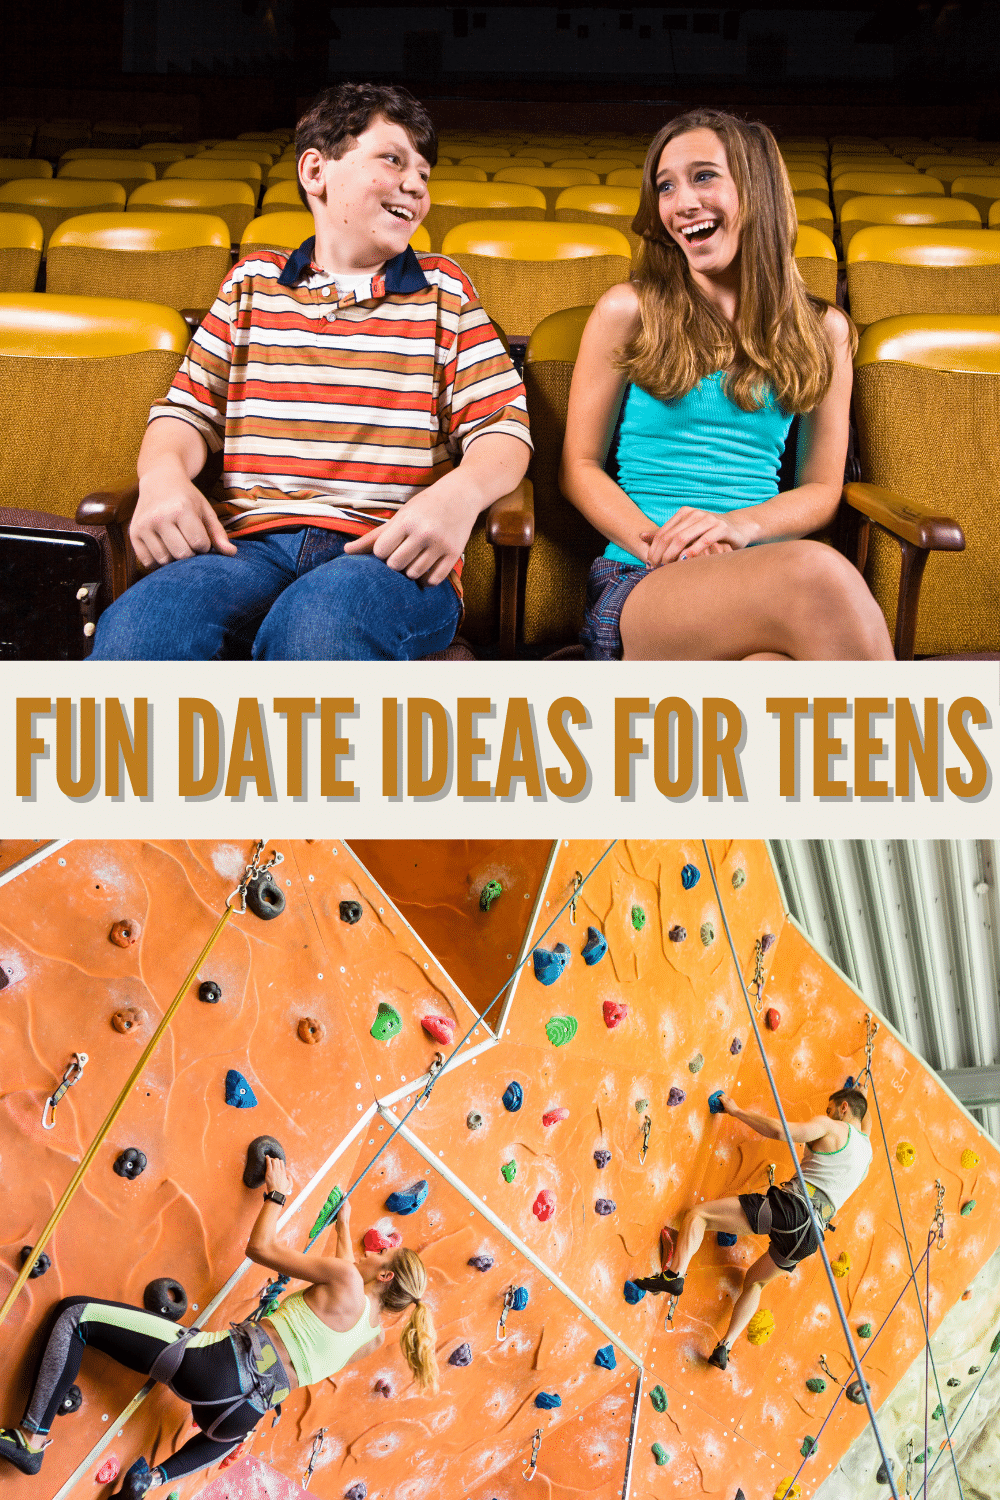 Great list of teen date ideas for summer, winter, and any time of year! #dateideas #fun #teens via @wondermomwannab